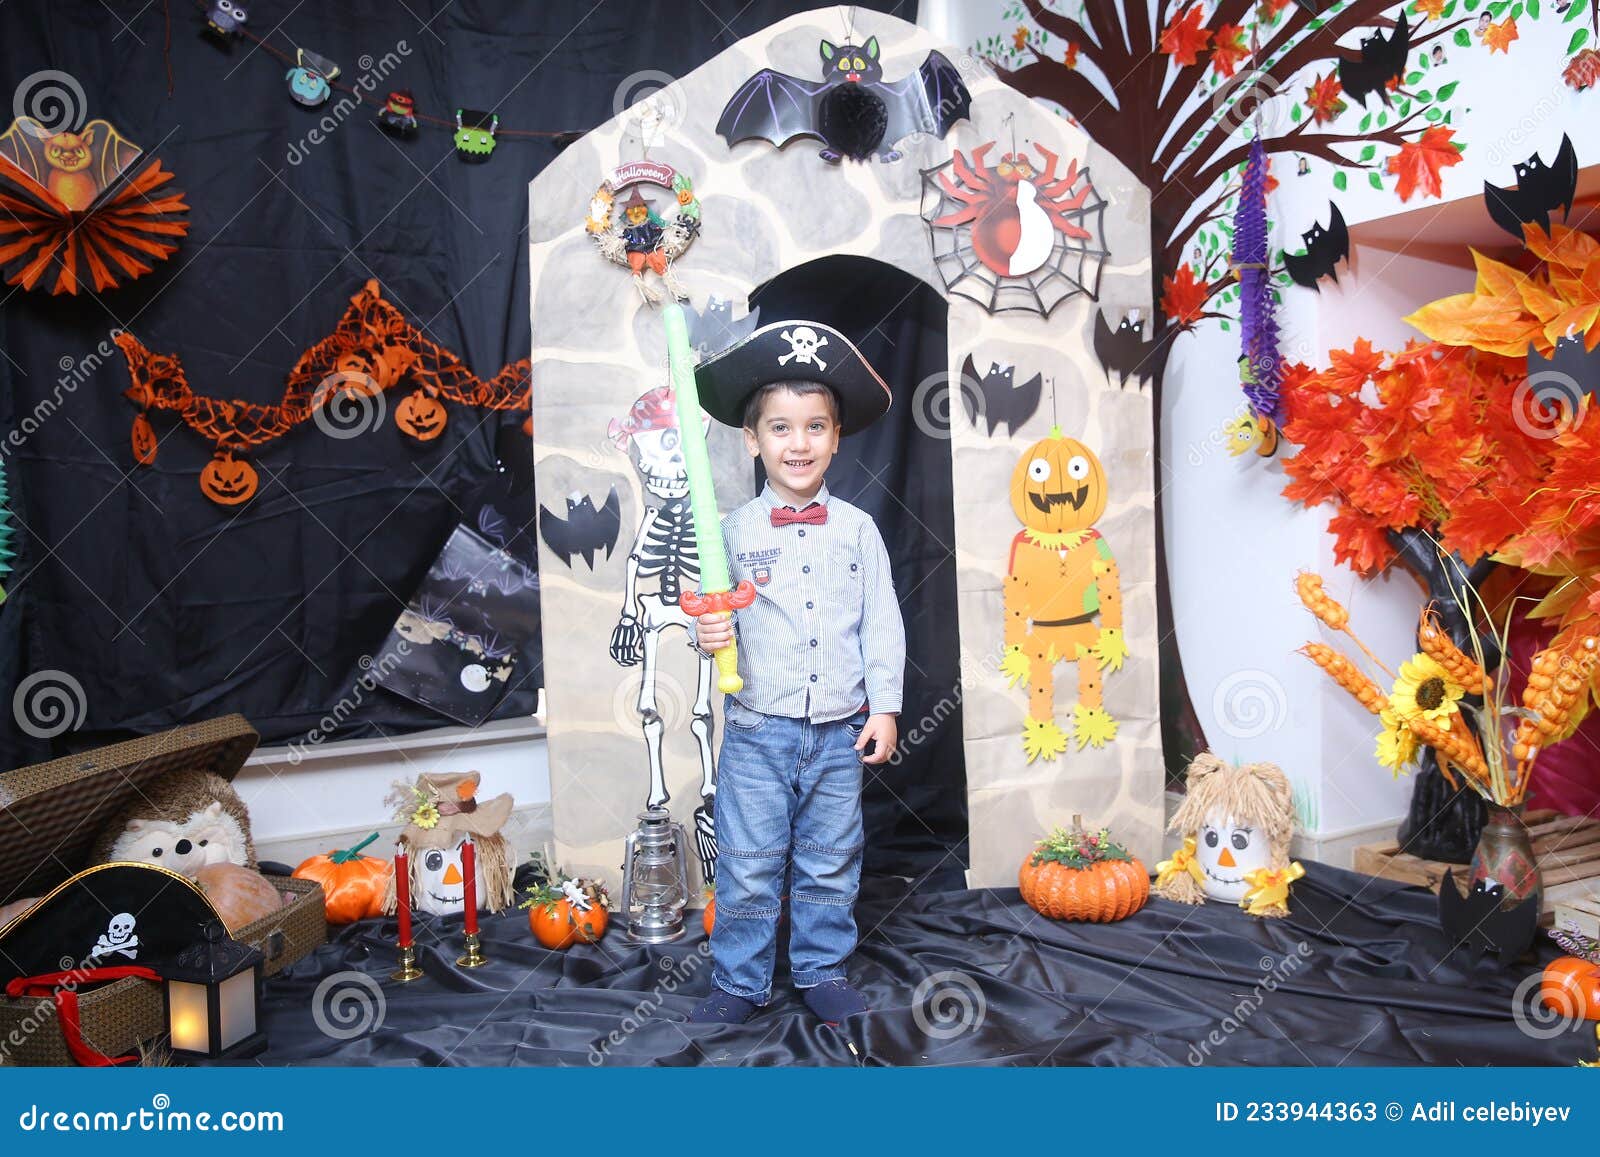 A child poses for photos next to the Pumpkin sculptures by